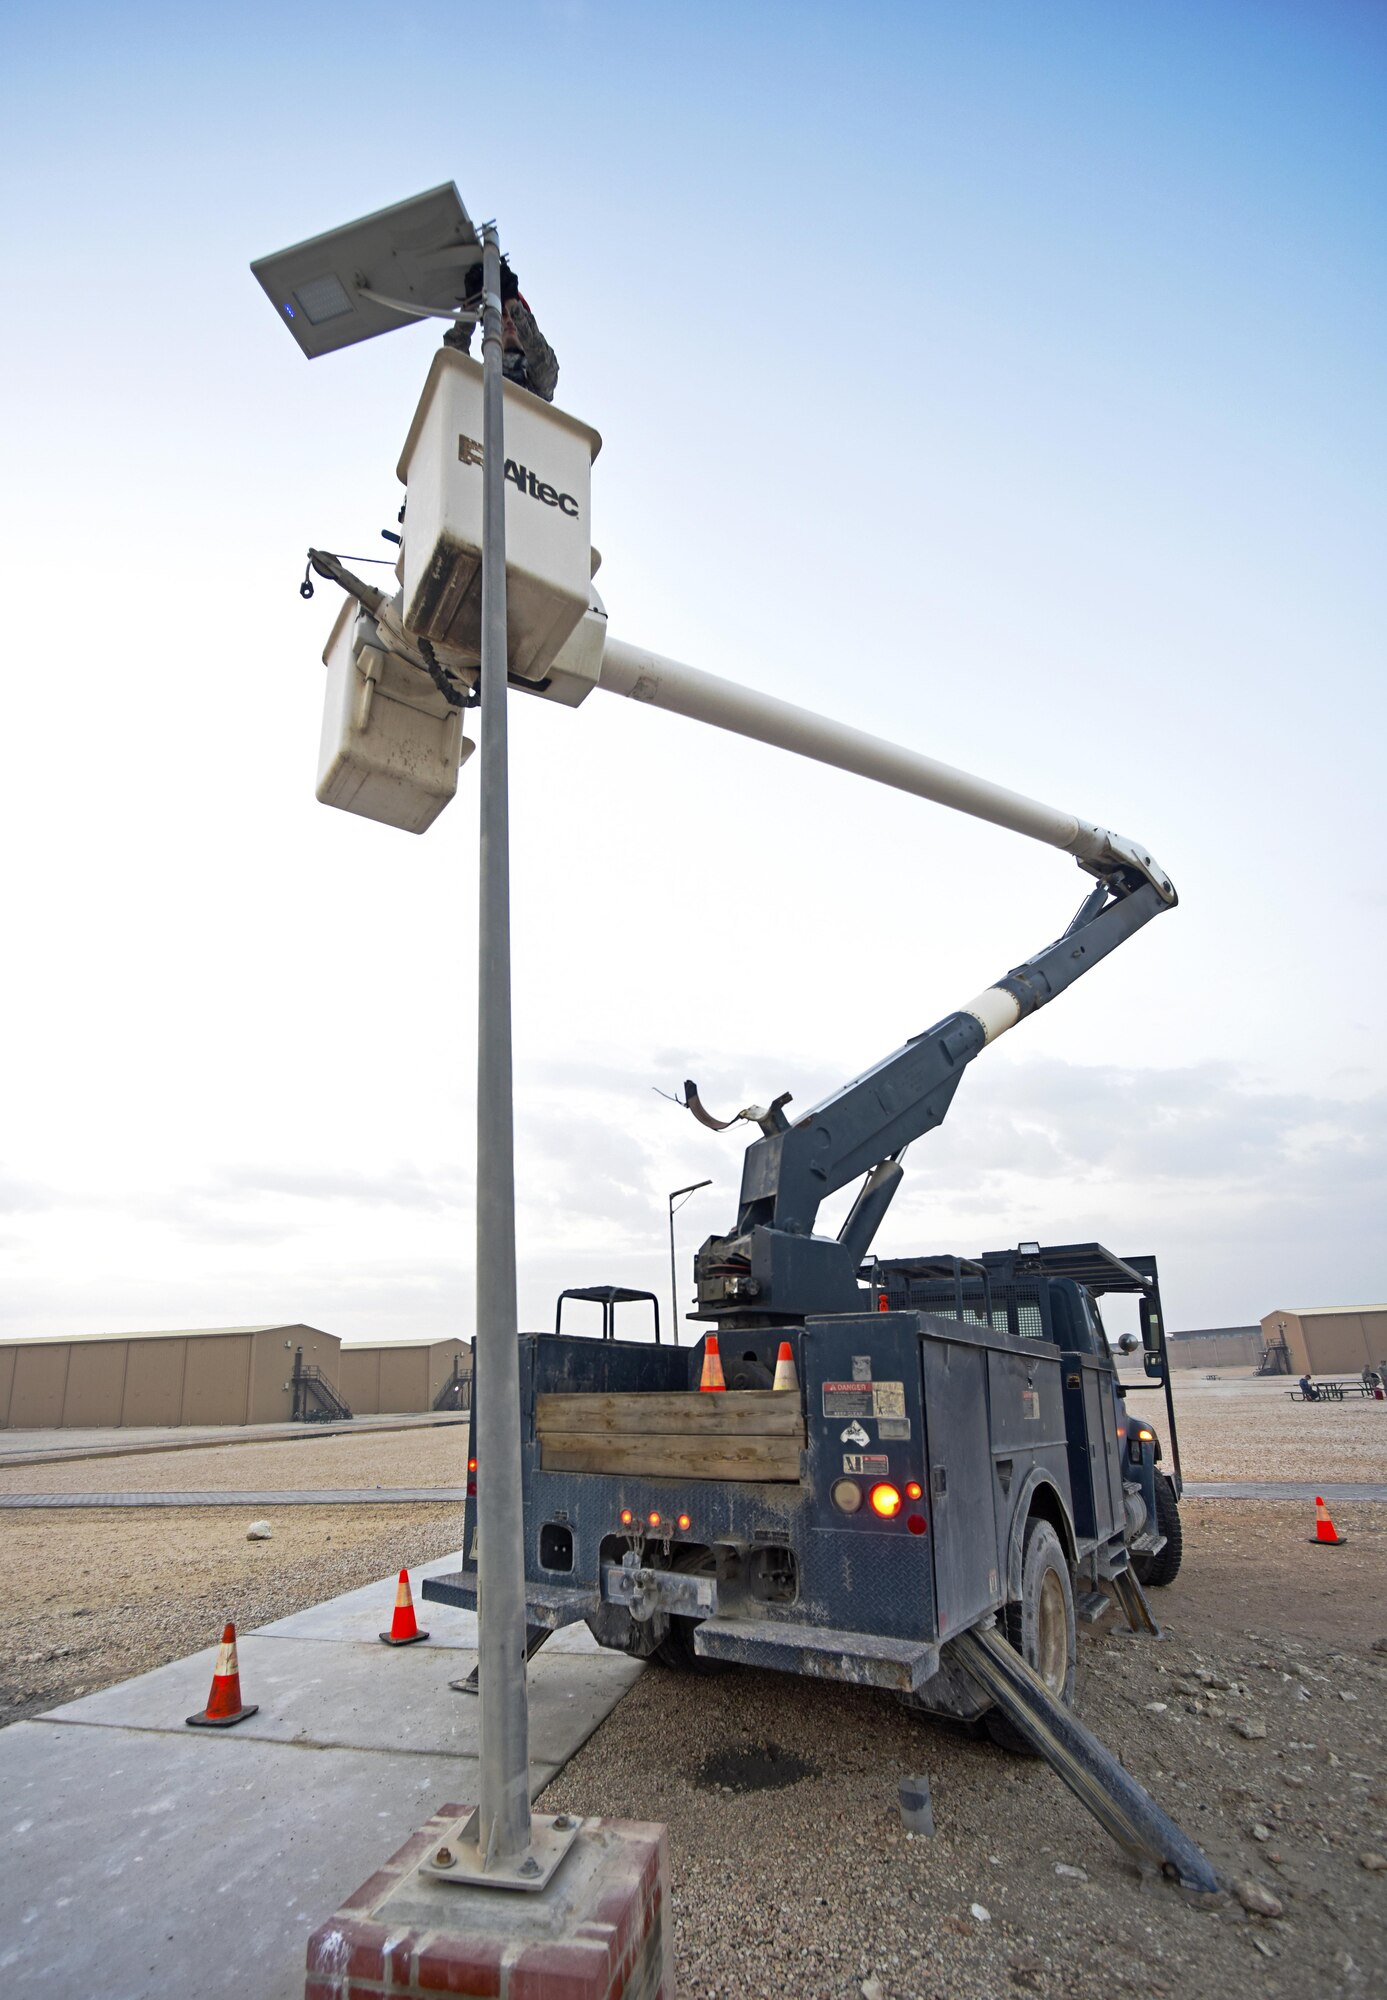 U.S. Air Force Airman 1st Class Corey Martin, an electrical systems apprentice with the 379th Expeditionary Civil Engineer Squadron, adjusts a light fixture at Al Udeid Air Base, Qatar, Feb. 22, 2017. This particular light fixture was a solar-powered low-emitting diode light that collects the sun’s energy during the day and stores it in a rechargeable battery cell.  (U.S. Air Force photo by Senior Airman Cynthia A. Innocenti)